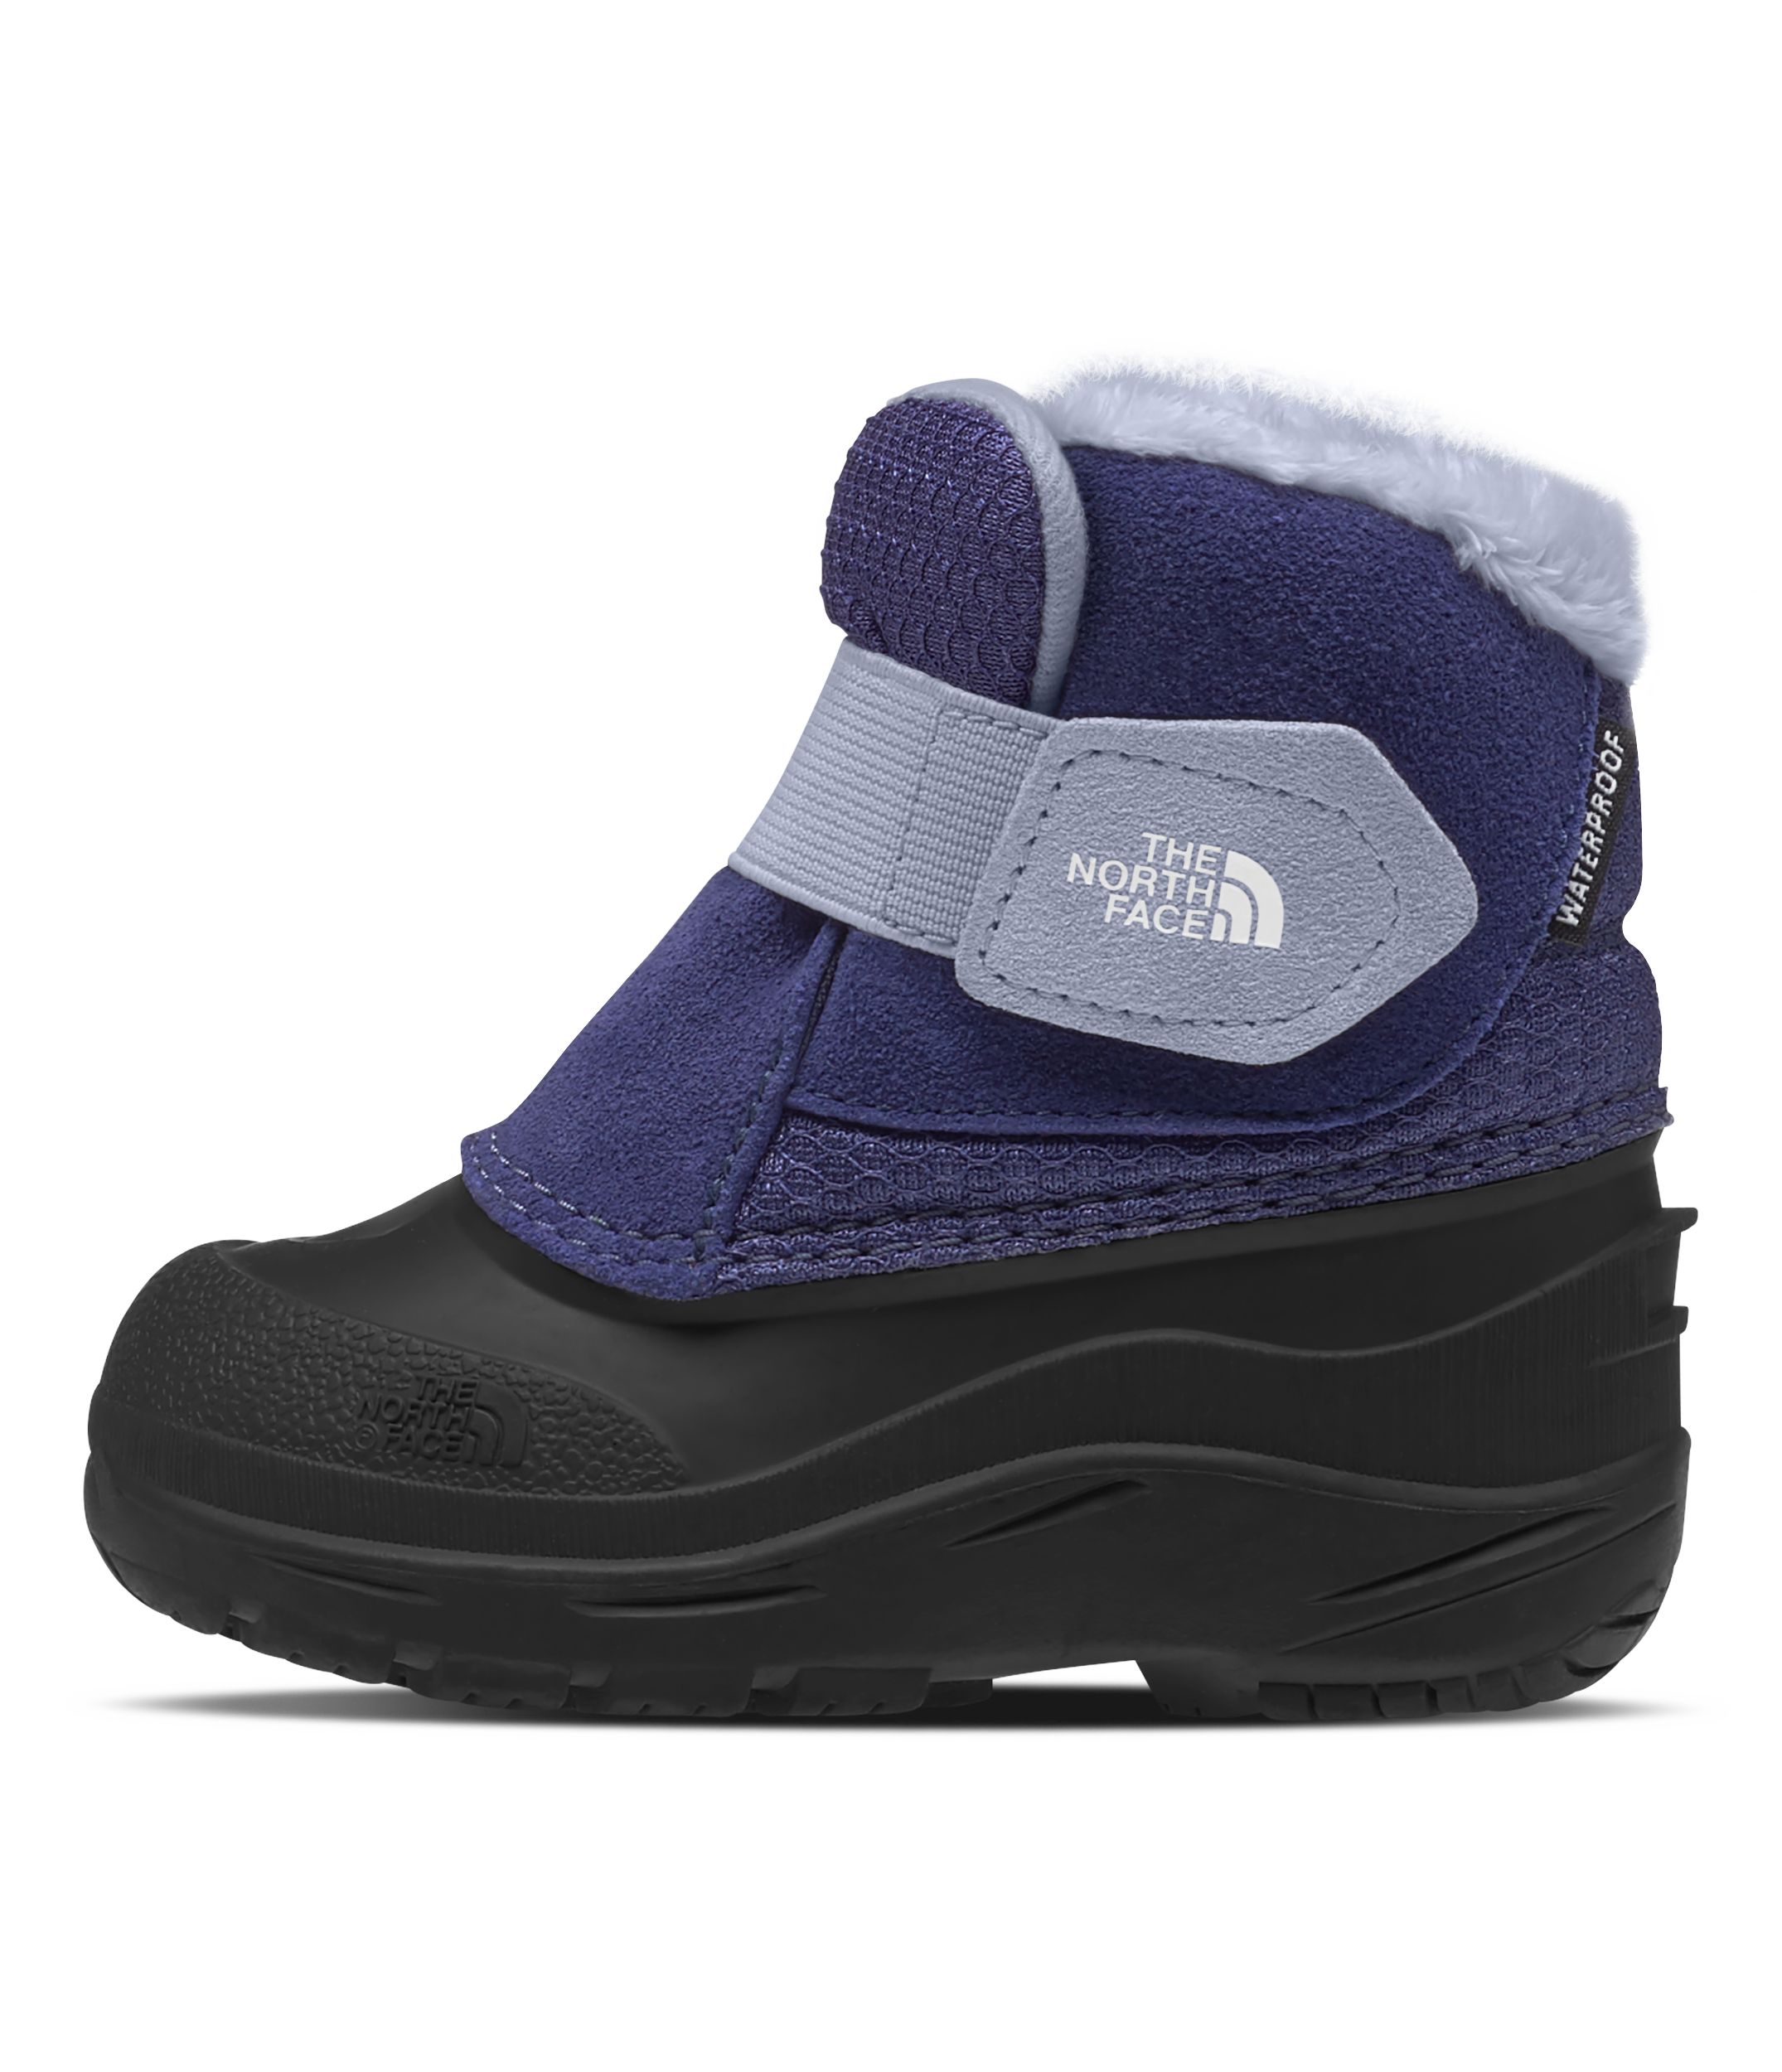 Image of The North Face Kids' Toddler Alpenglow II Boots